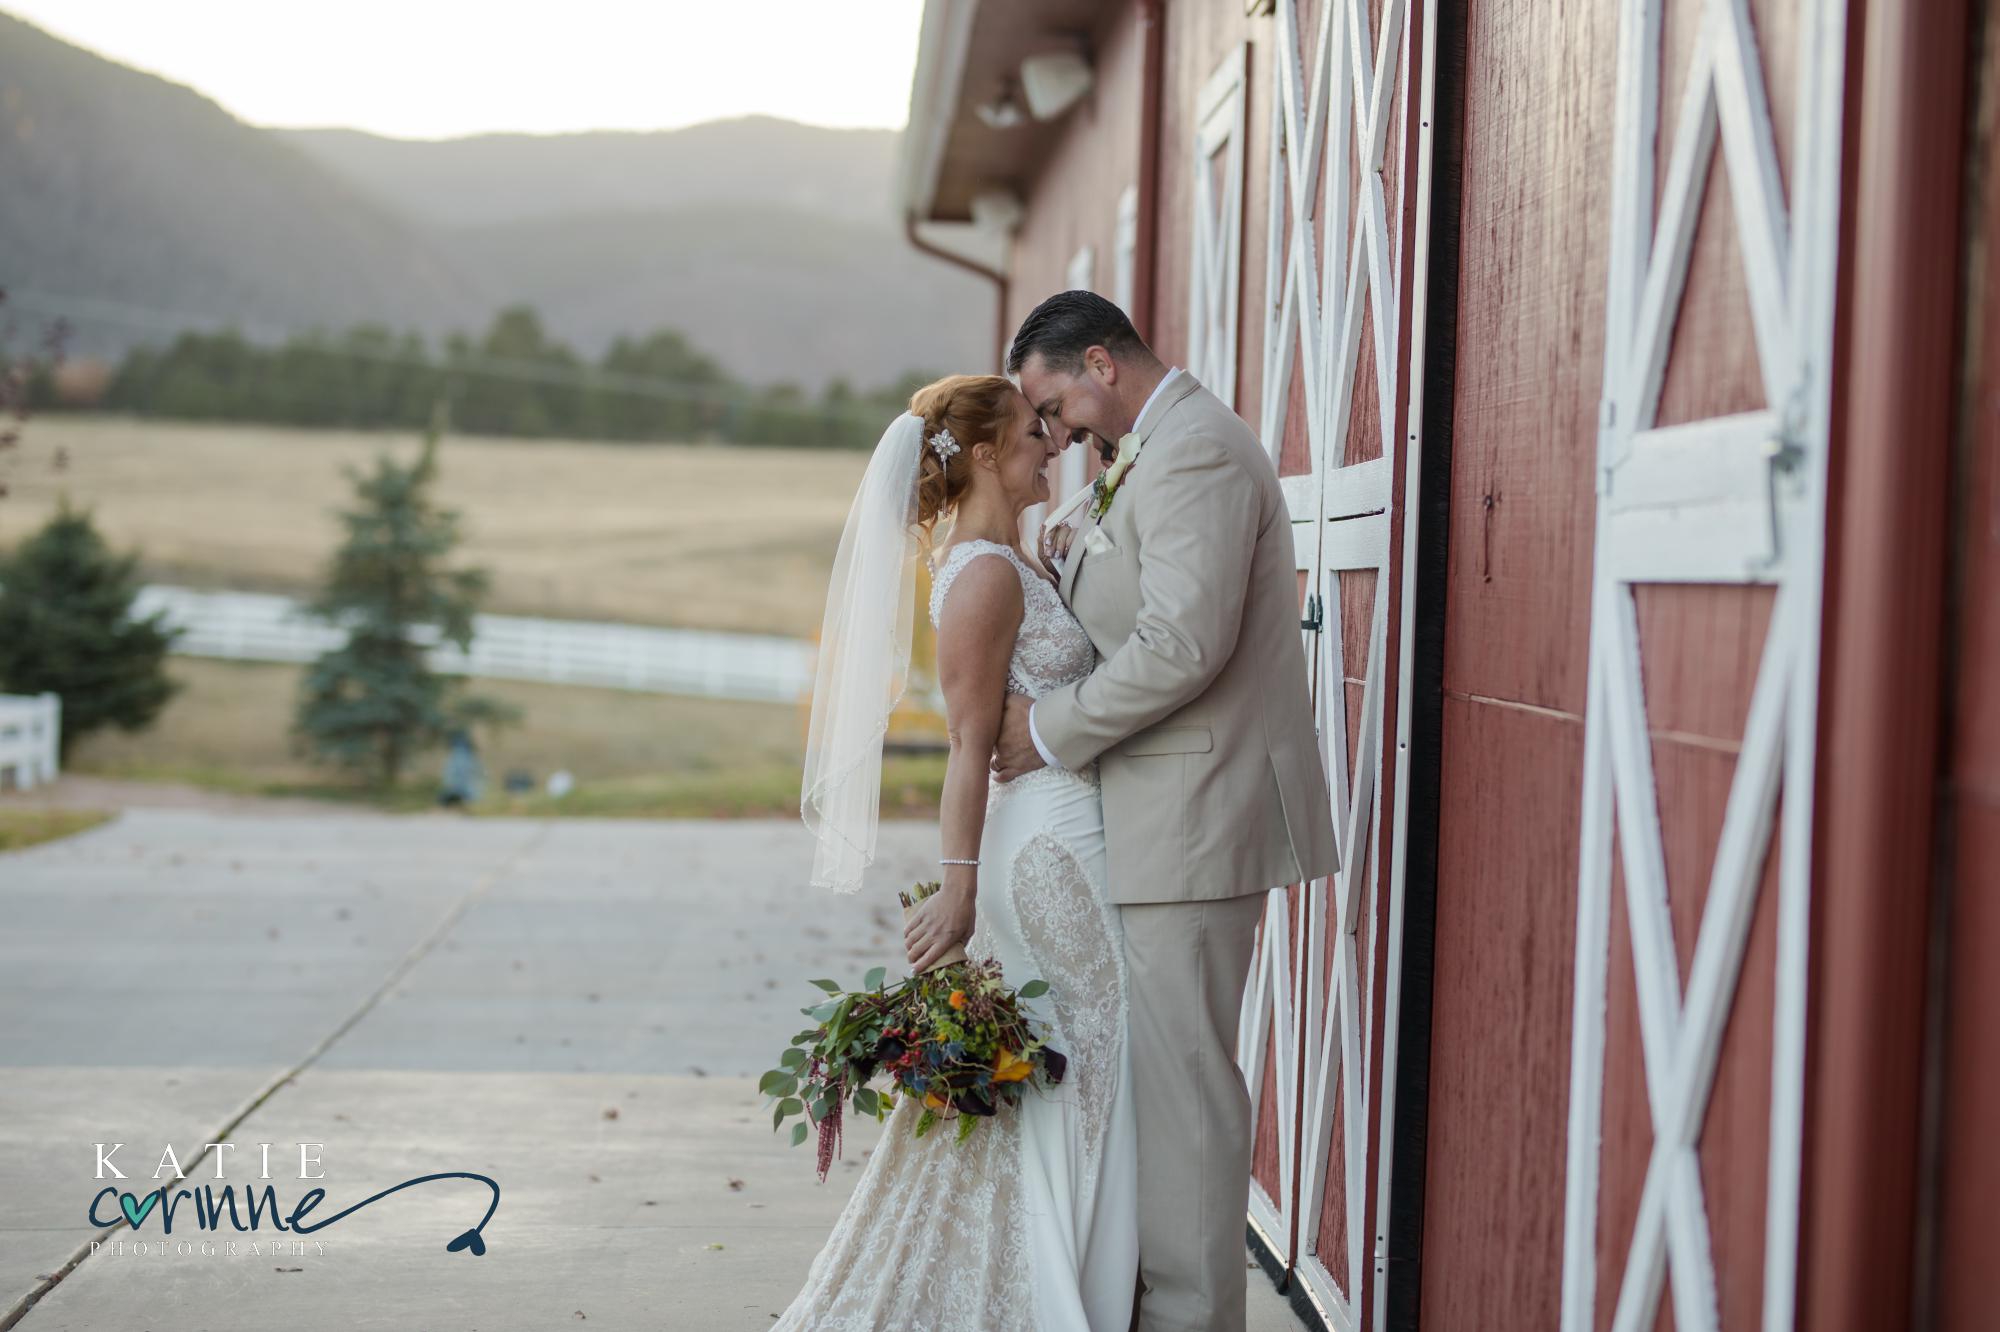 bride and groom kiss in front of red barn